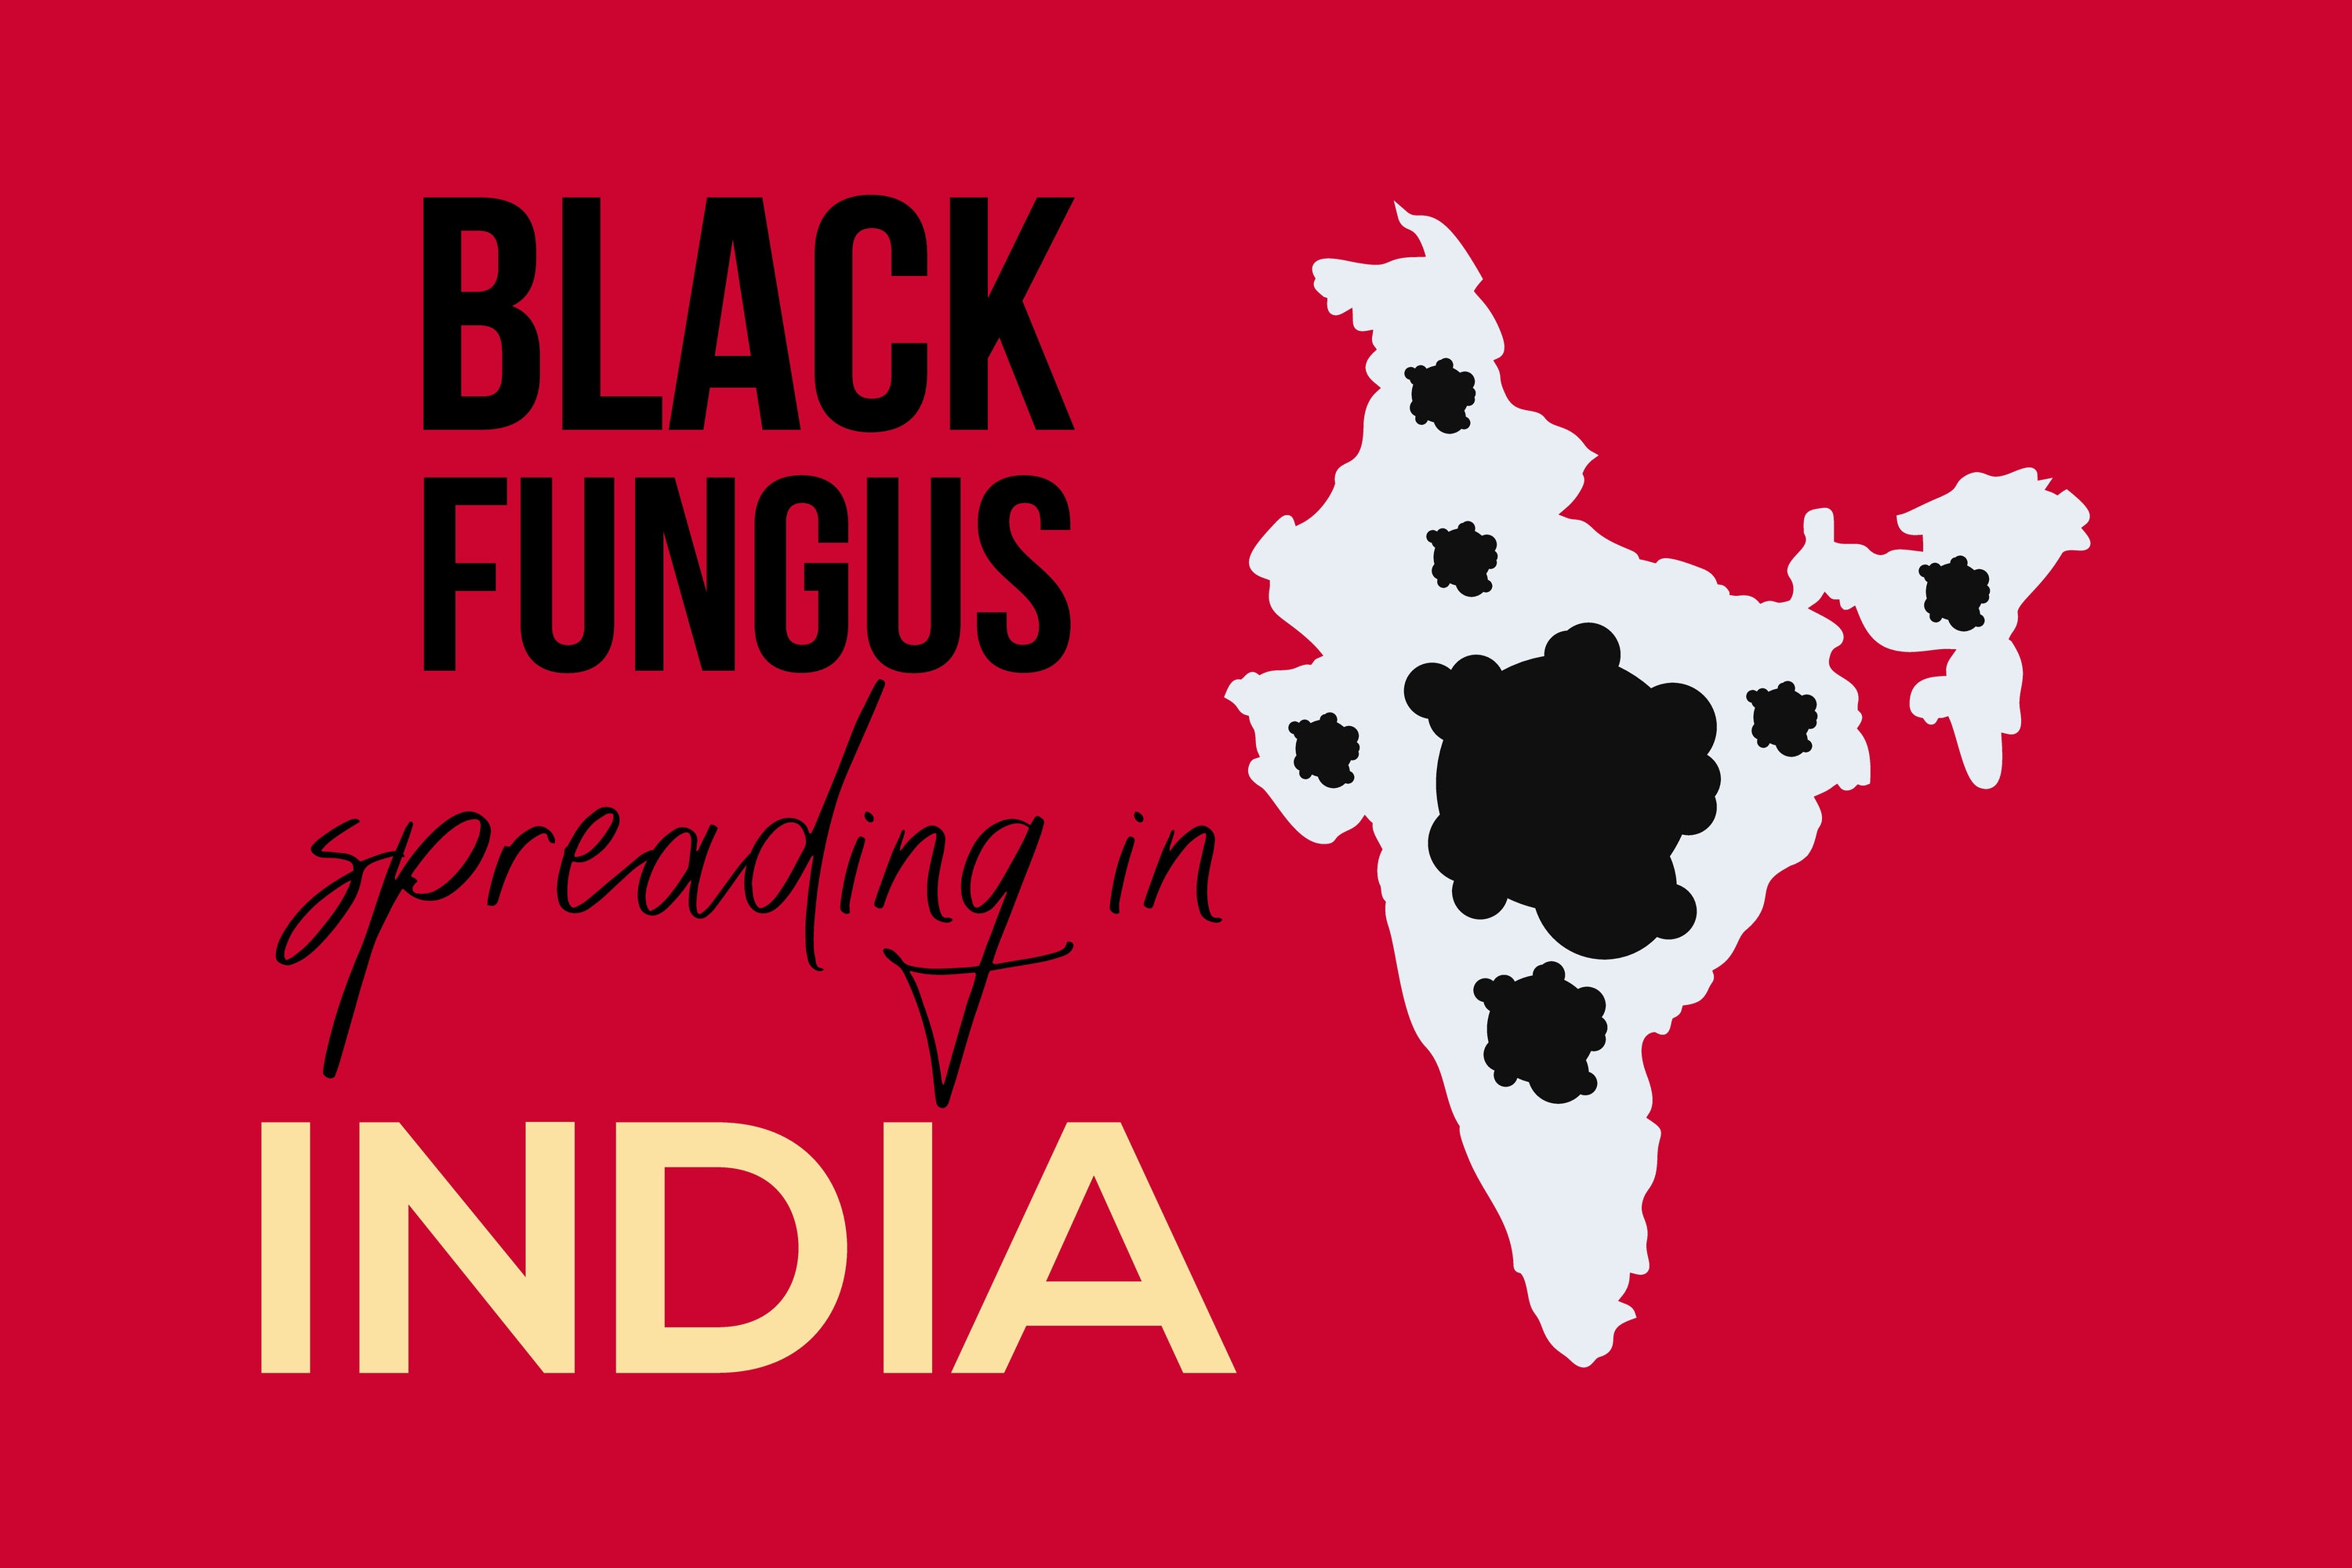 Black fungus or Mucormycosis spreading in India